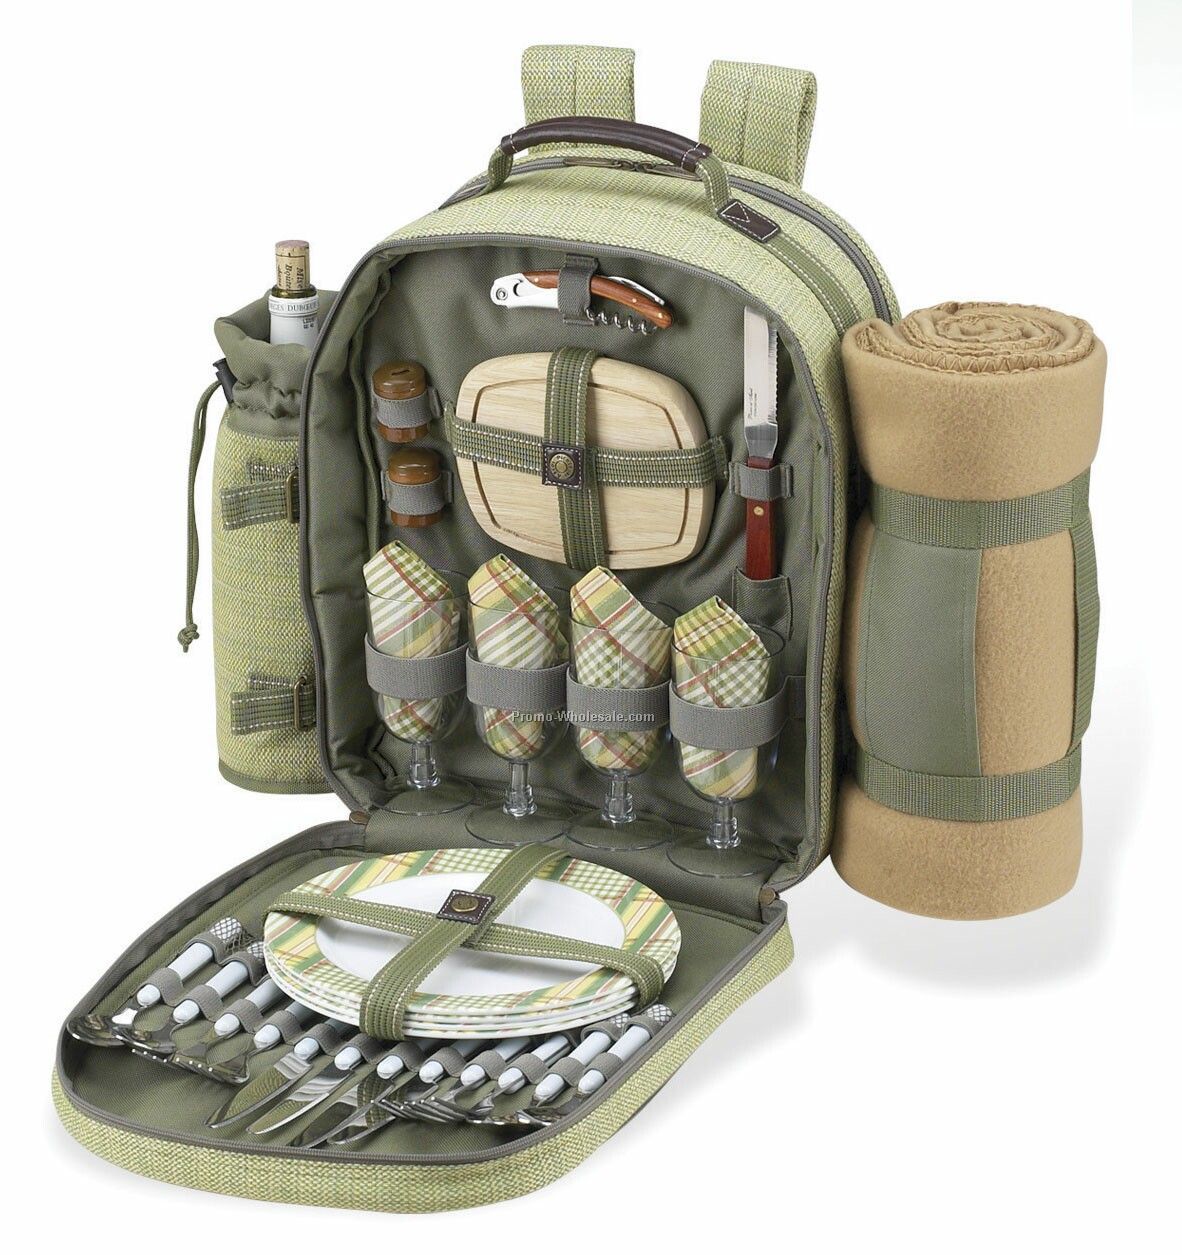 15-1/2"x16"x6-1/2" Picnic Backpack With Blanket For 4 People